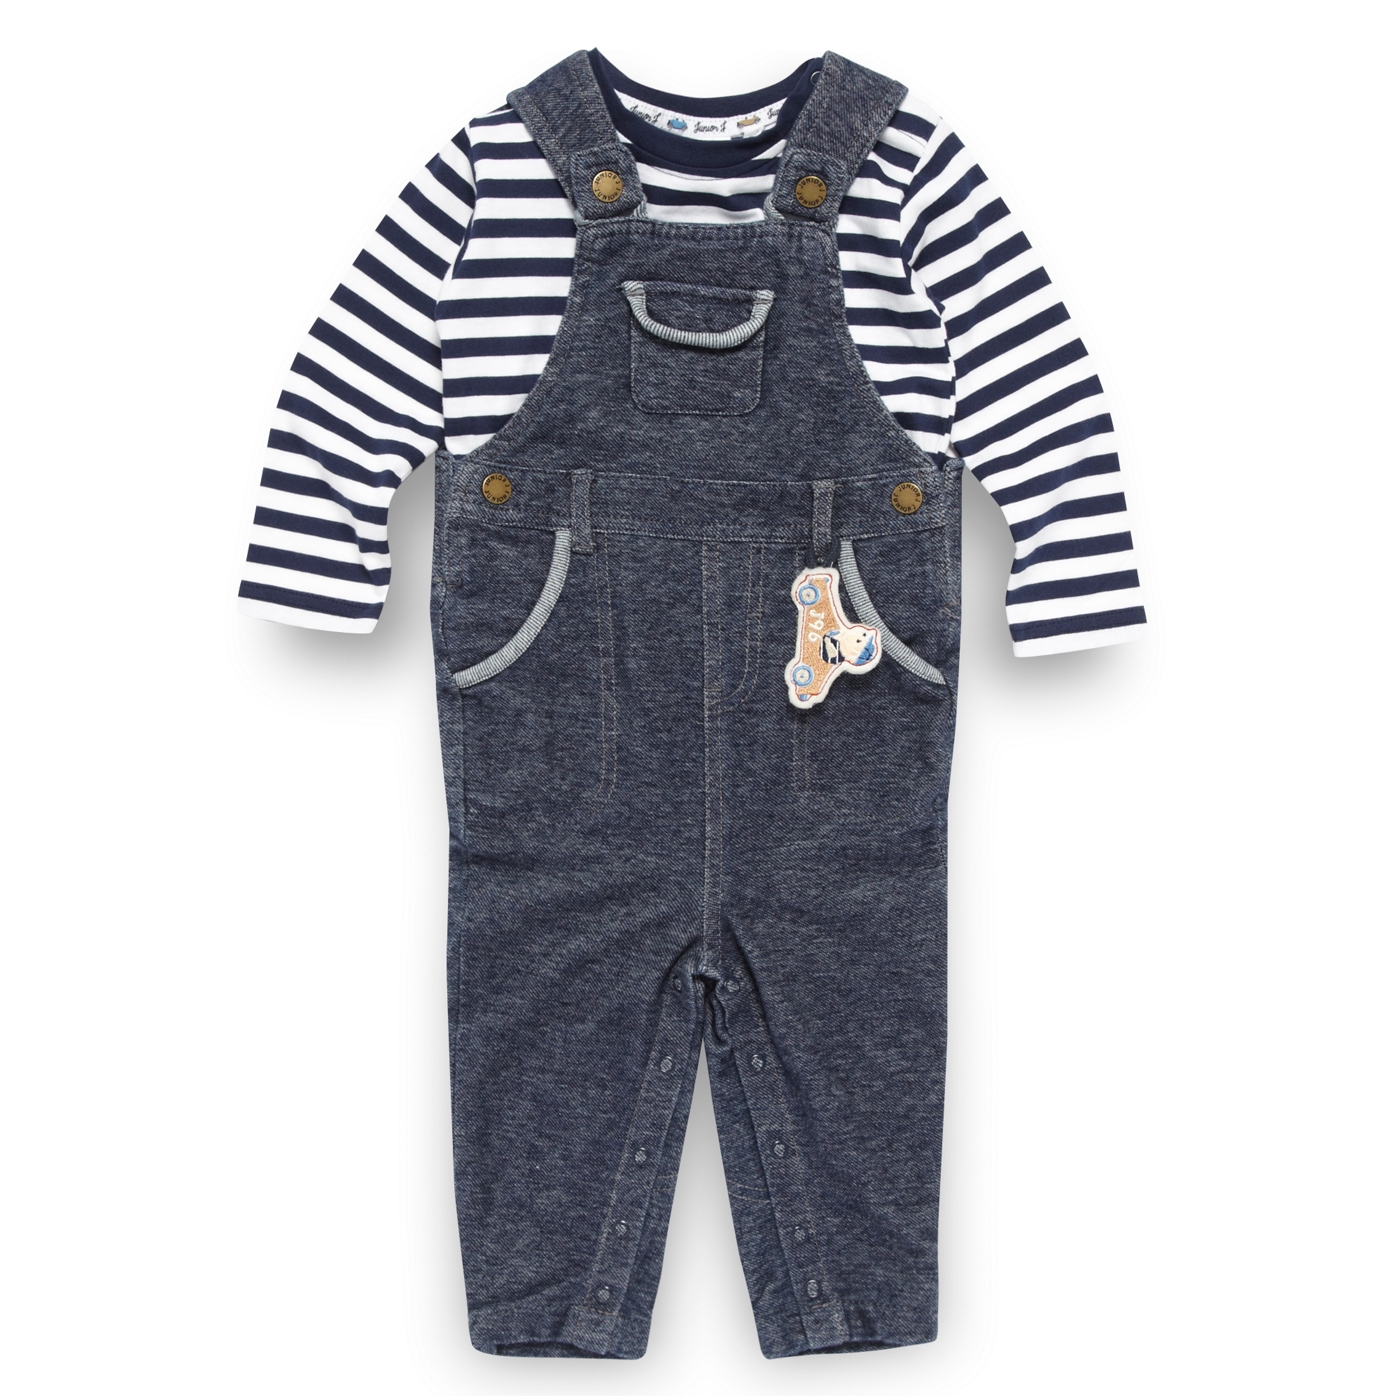 J by Jasper Conran Designer babies navy dungarees and striped top set